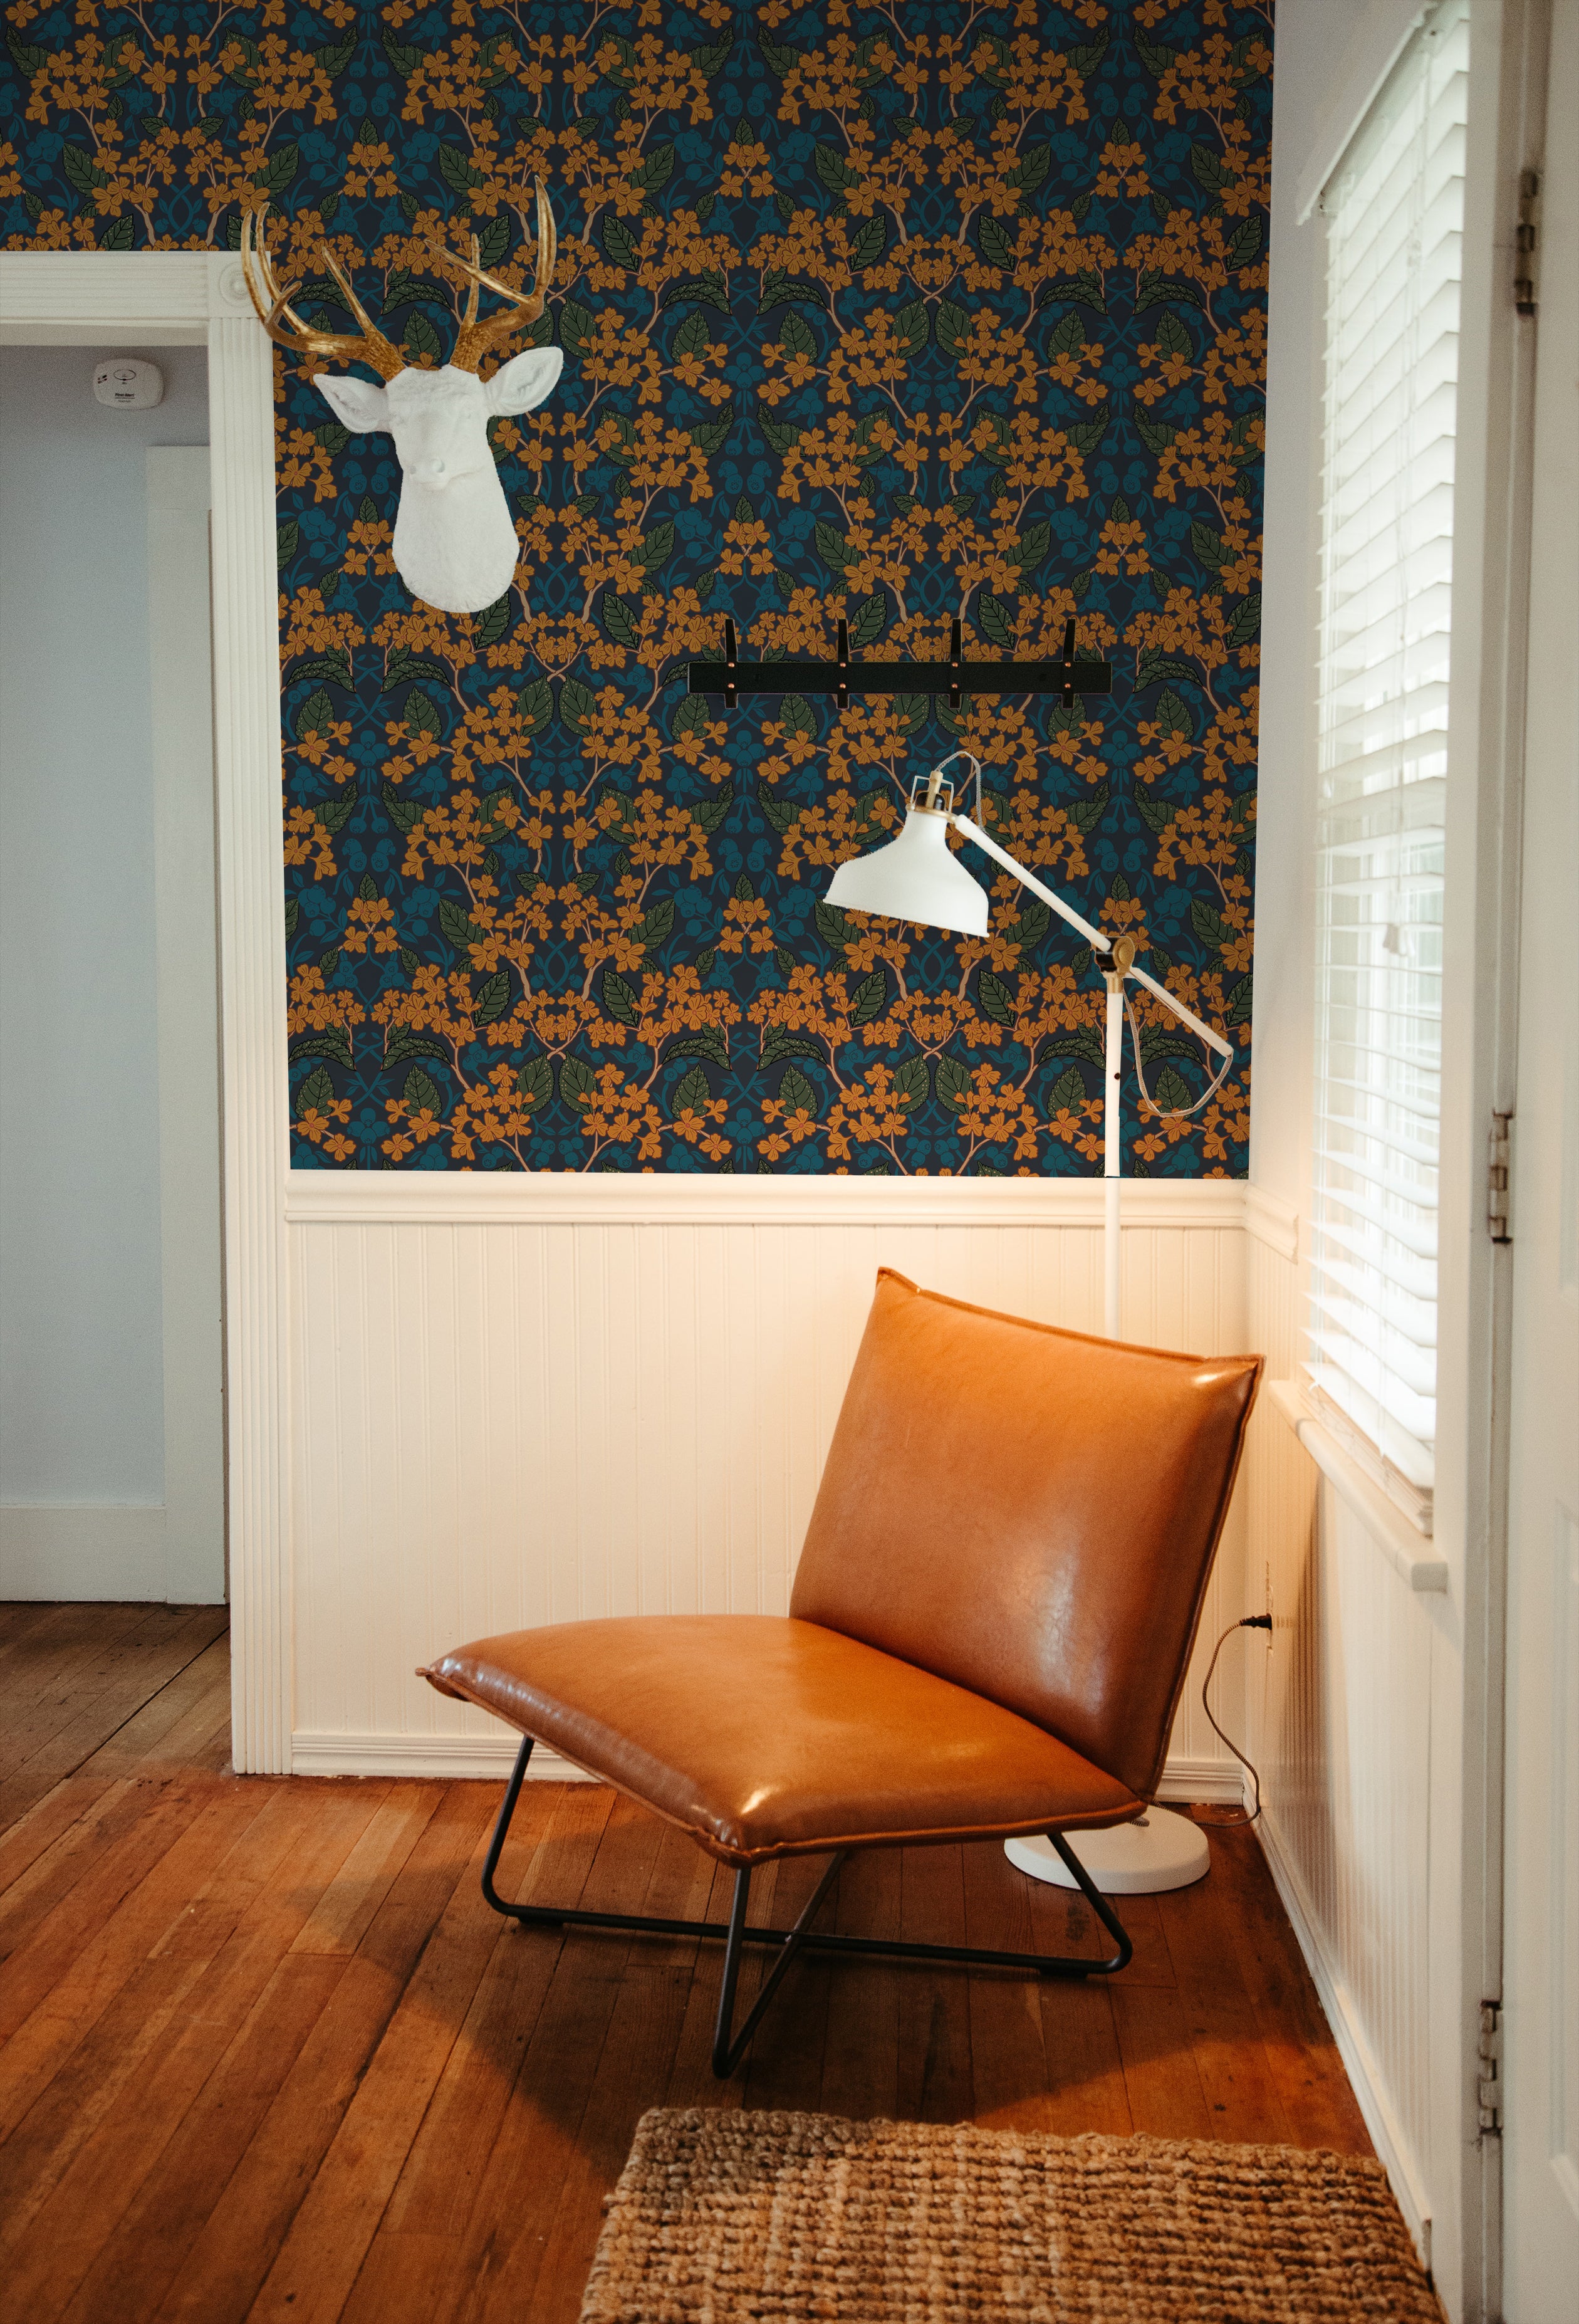 A cozy reading nook featuring Autumn Boho wallpaper with a floral pattern in shades of orange, blue, and green, accentuated by a white deer head sculpture, a modern leather sling chair, and a wooden floor